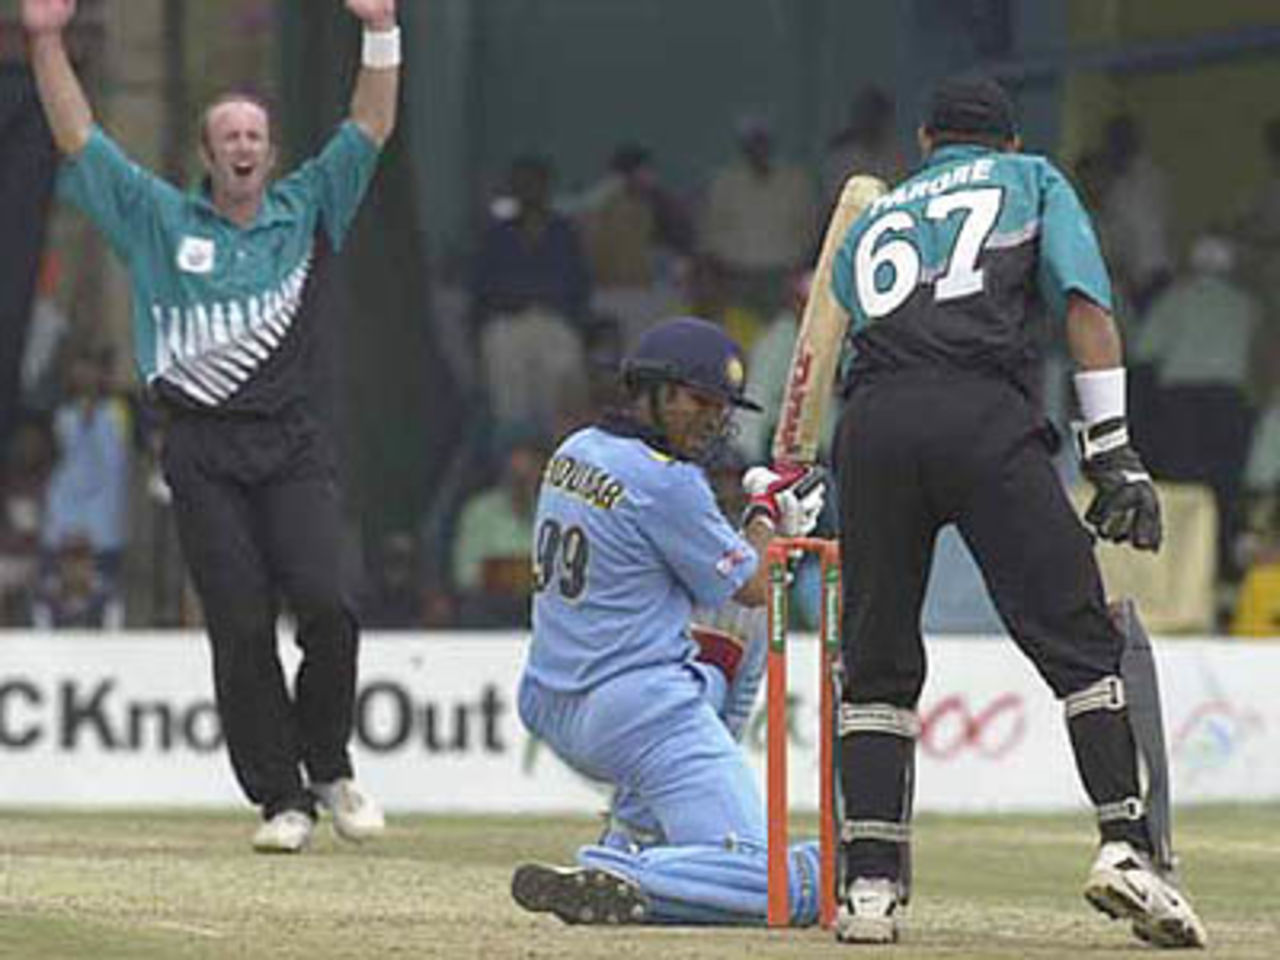 Harris in despair as the ball narrowly misses the stumps, ICC KnockOut, 2000/01, Final, India v New Zealand, Gymkhana Club Ground, Nairobi, 15 October 2000.